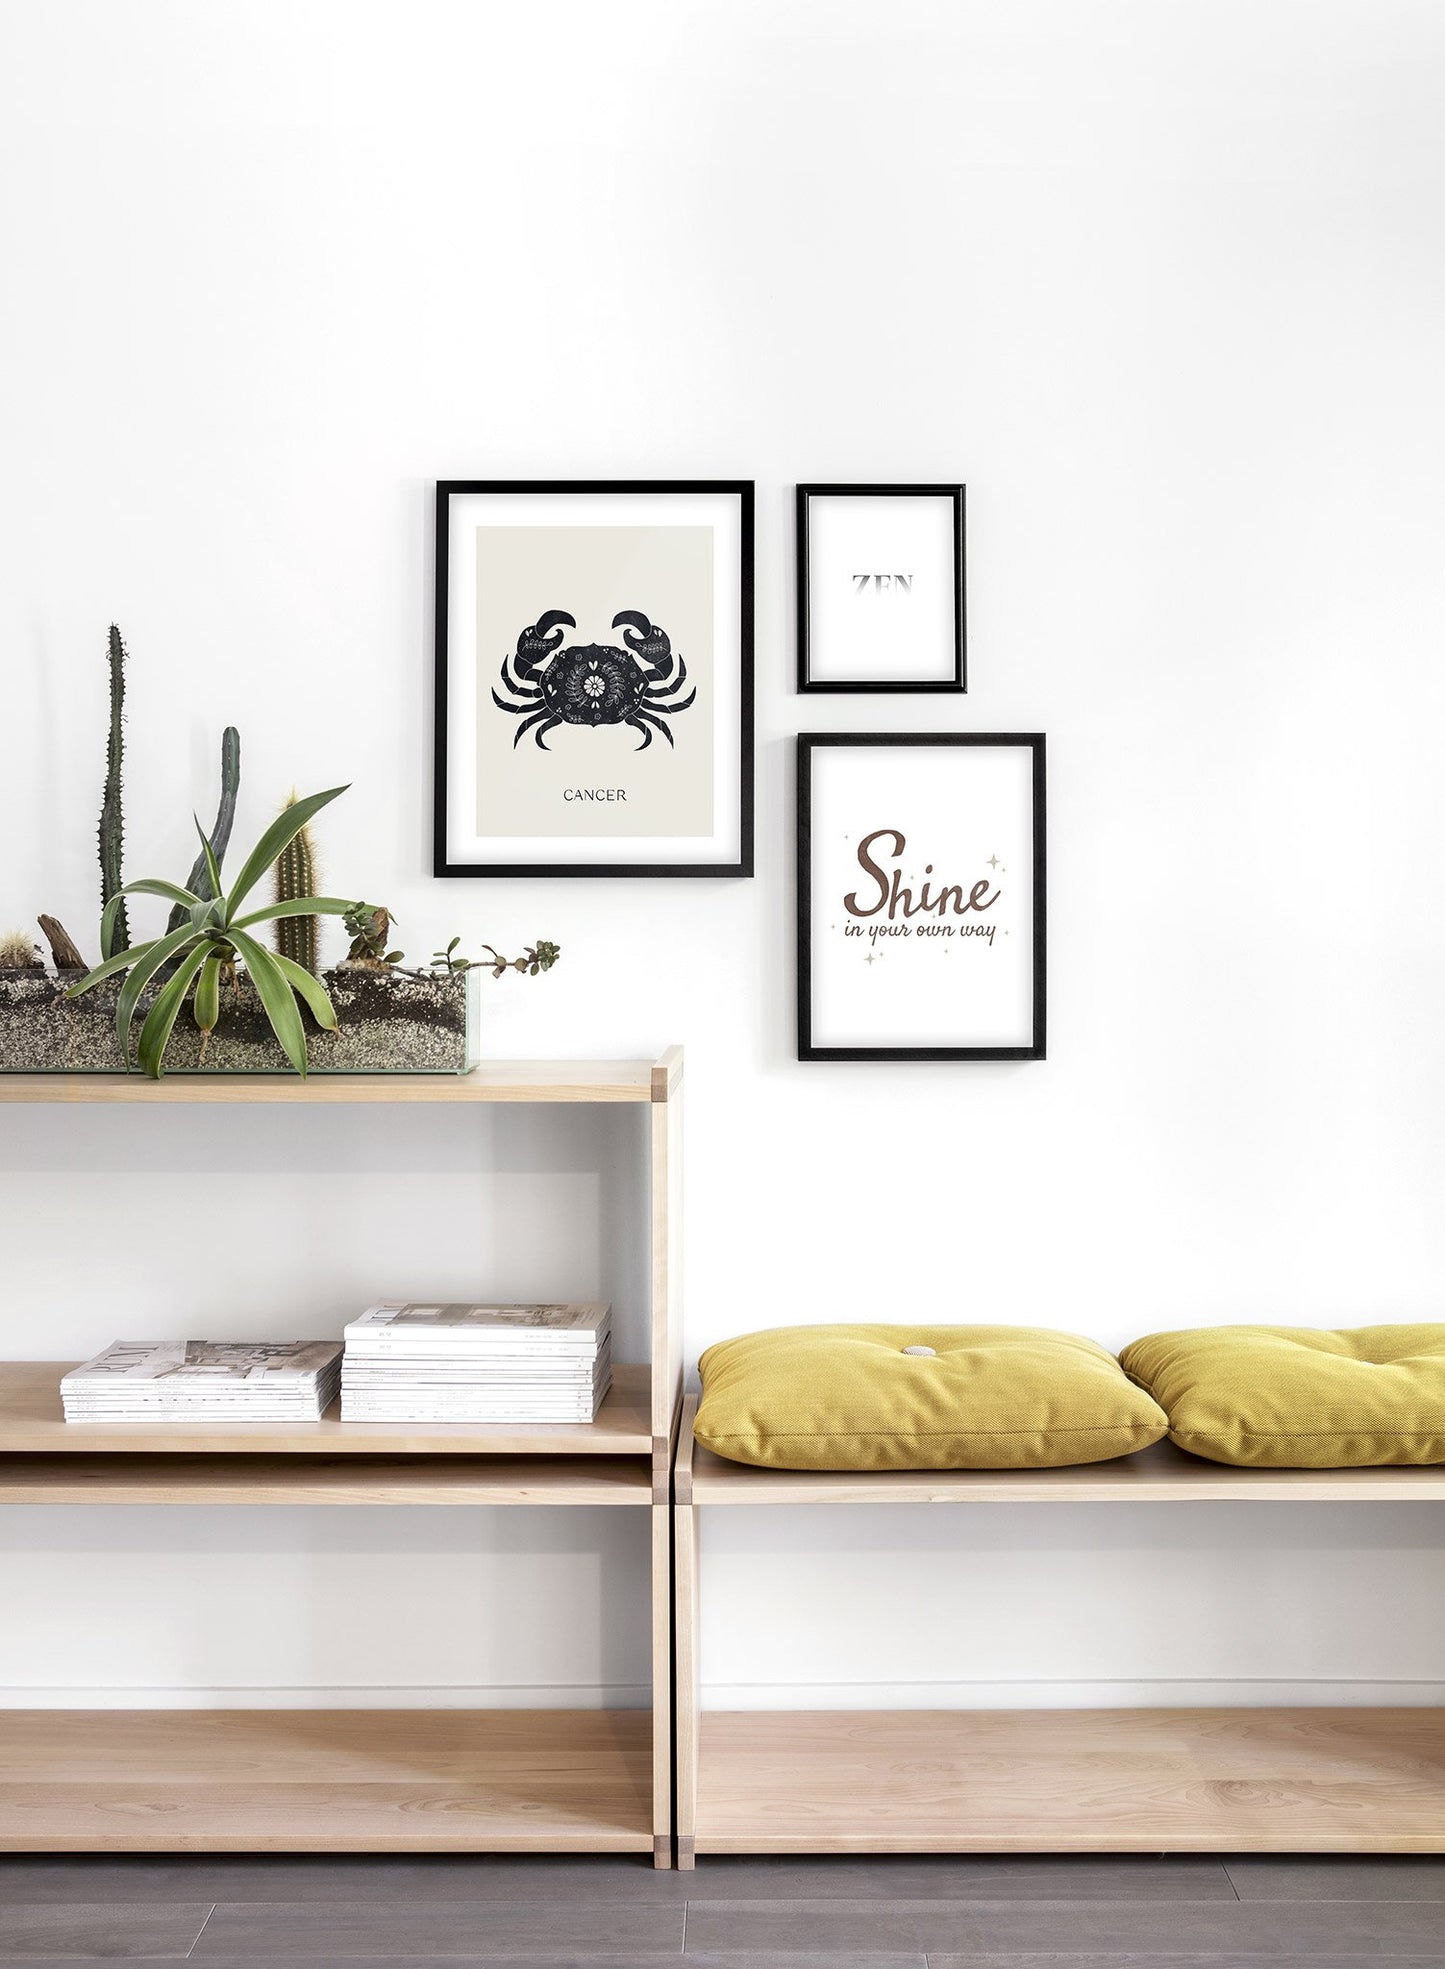 Celestial Illustration poster by Opposite Wall with horoscope zodiac symbol of Cancer crab - Lifestyle Trio - Entryway